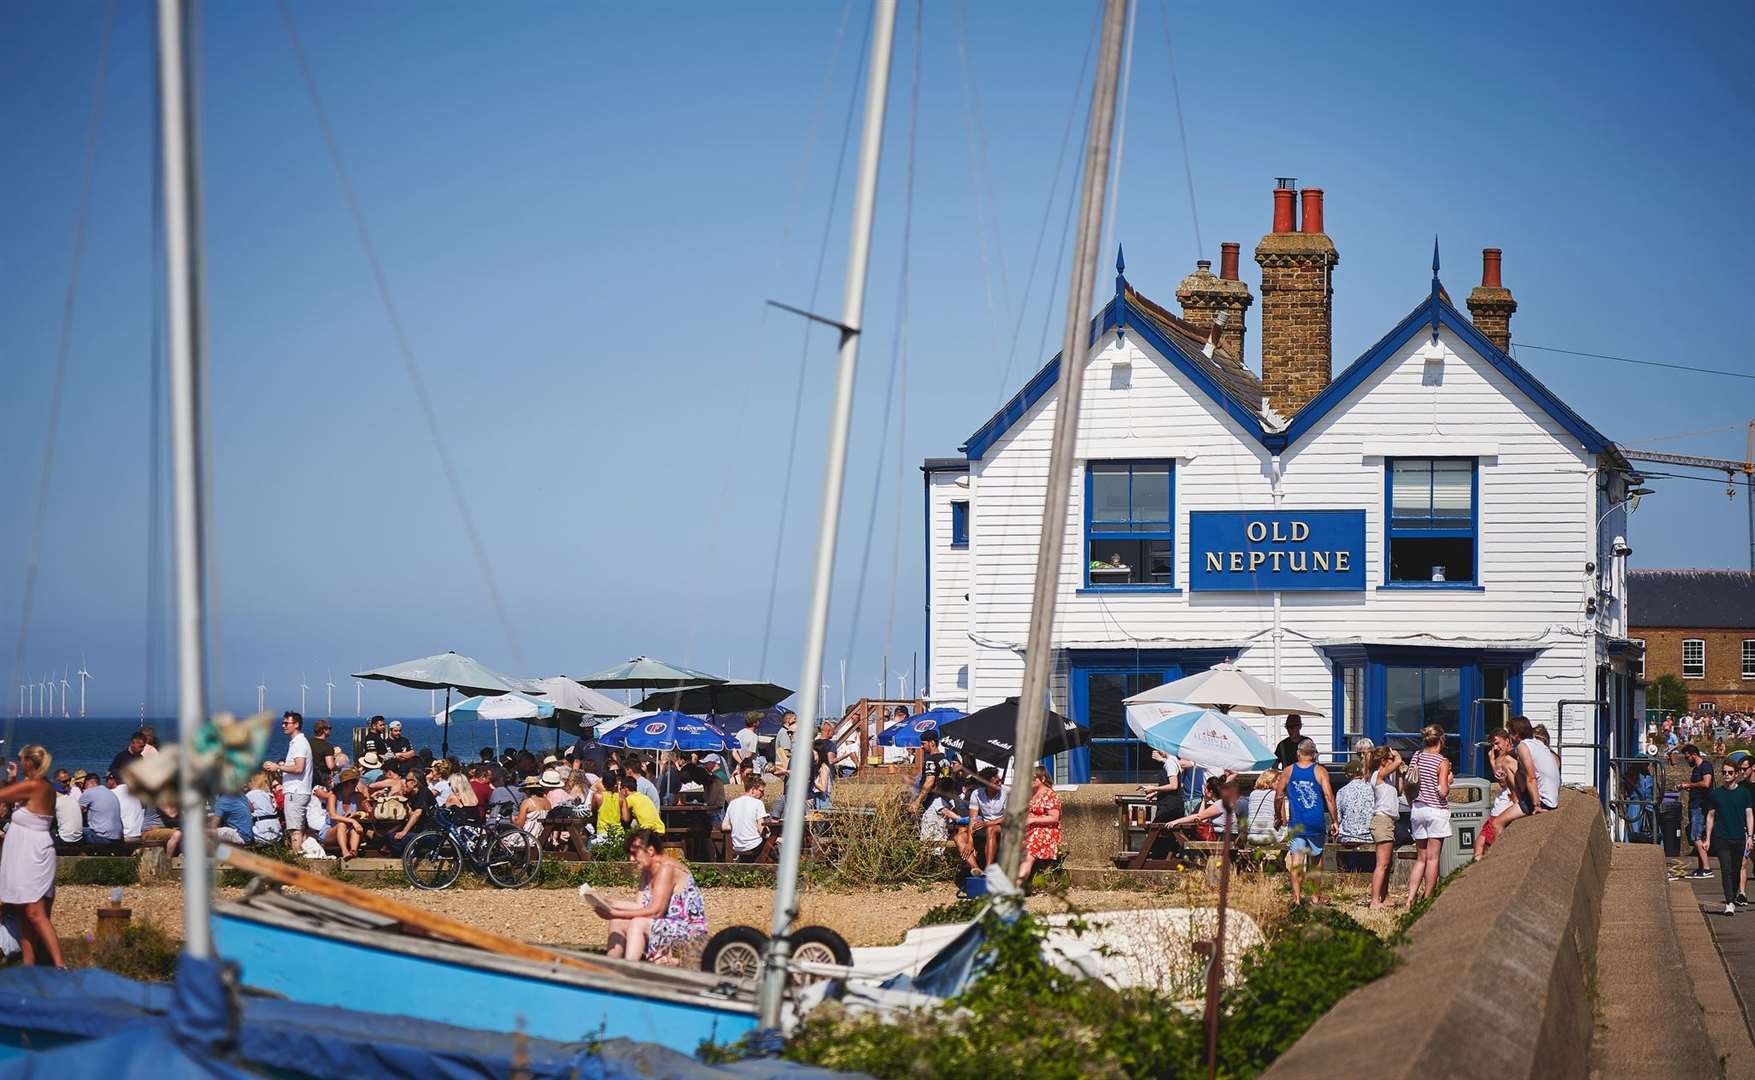 The Old Neptune is one of the Kent coast’s most recogniable pubs. Picture: iStock